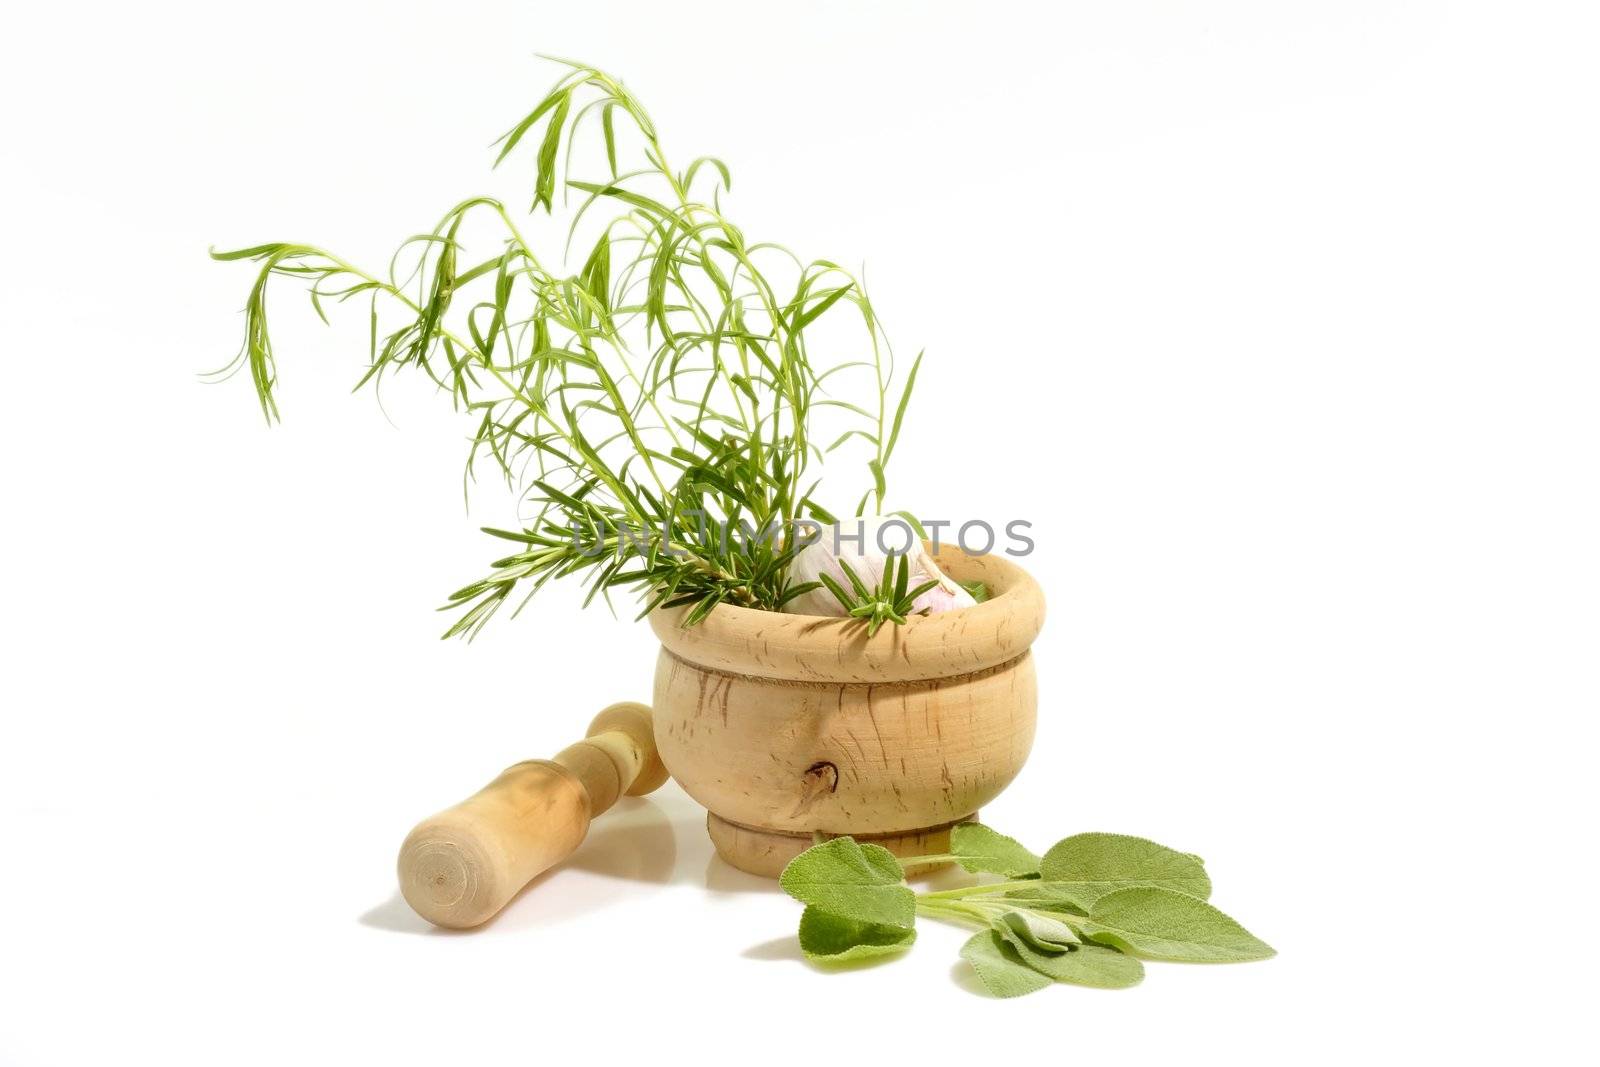 Mortar with culinary herbs on white background